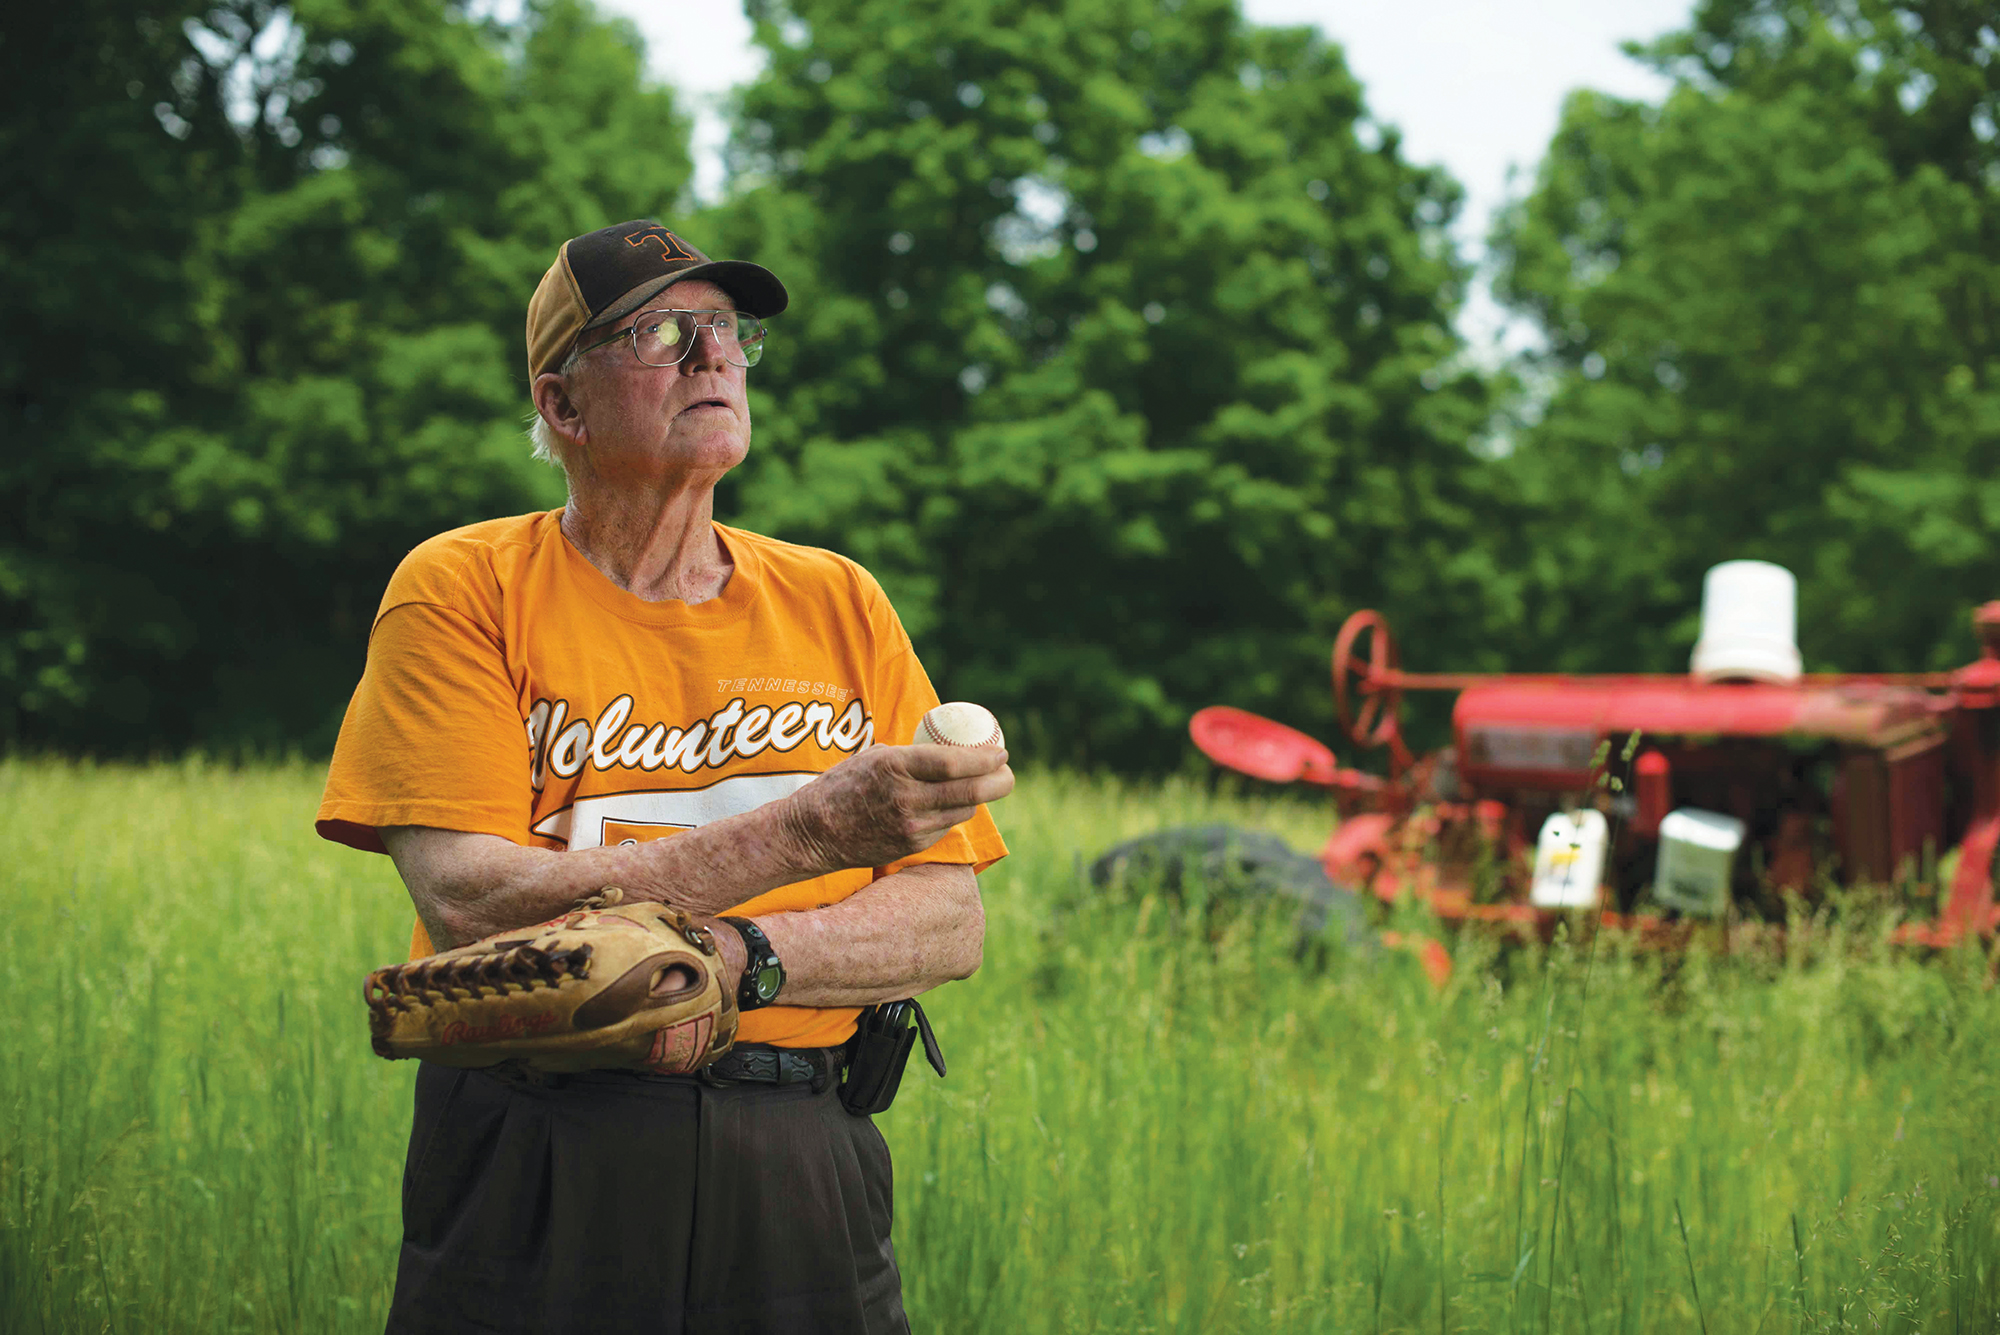 Randall Crowell pictured on his farm in UT orange tshirt, holding a baseball and glove.